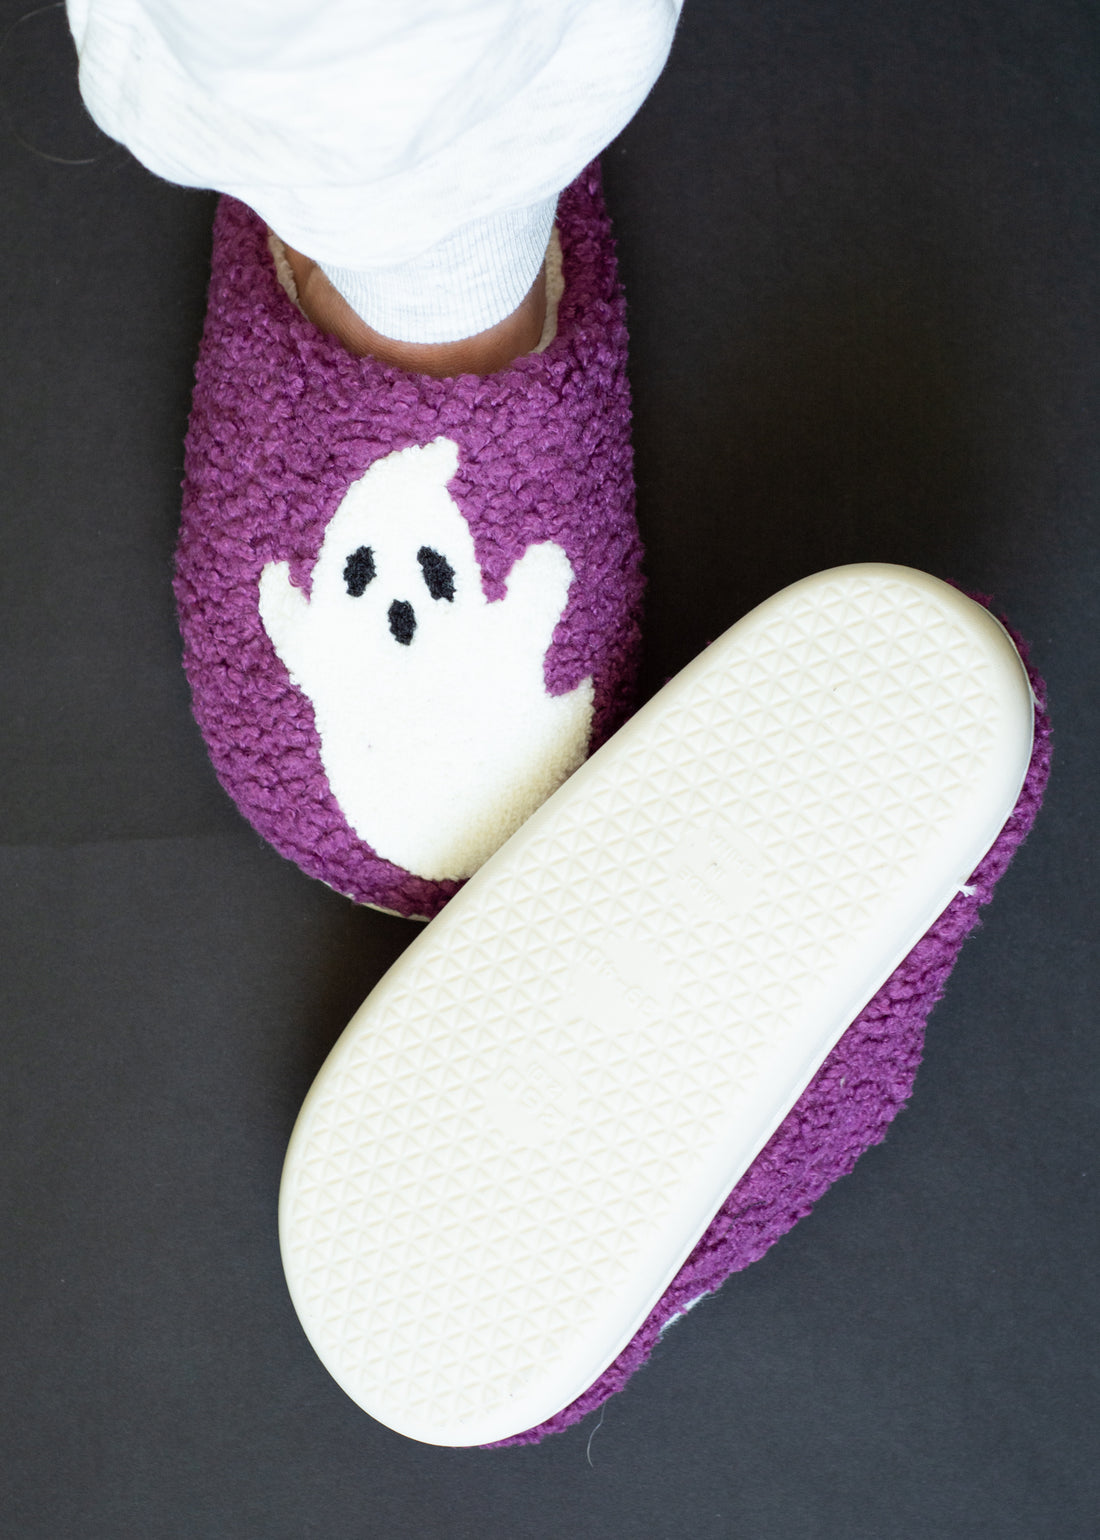 Spooky Ghoul Slippers